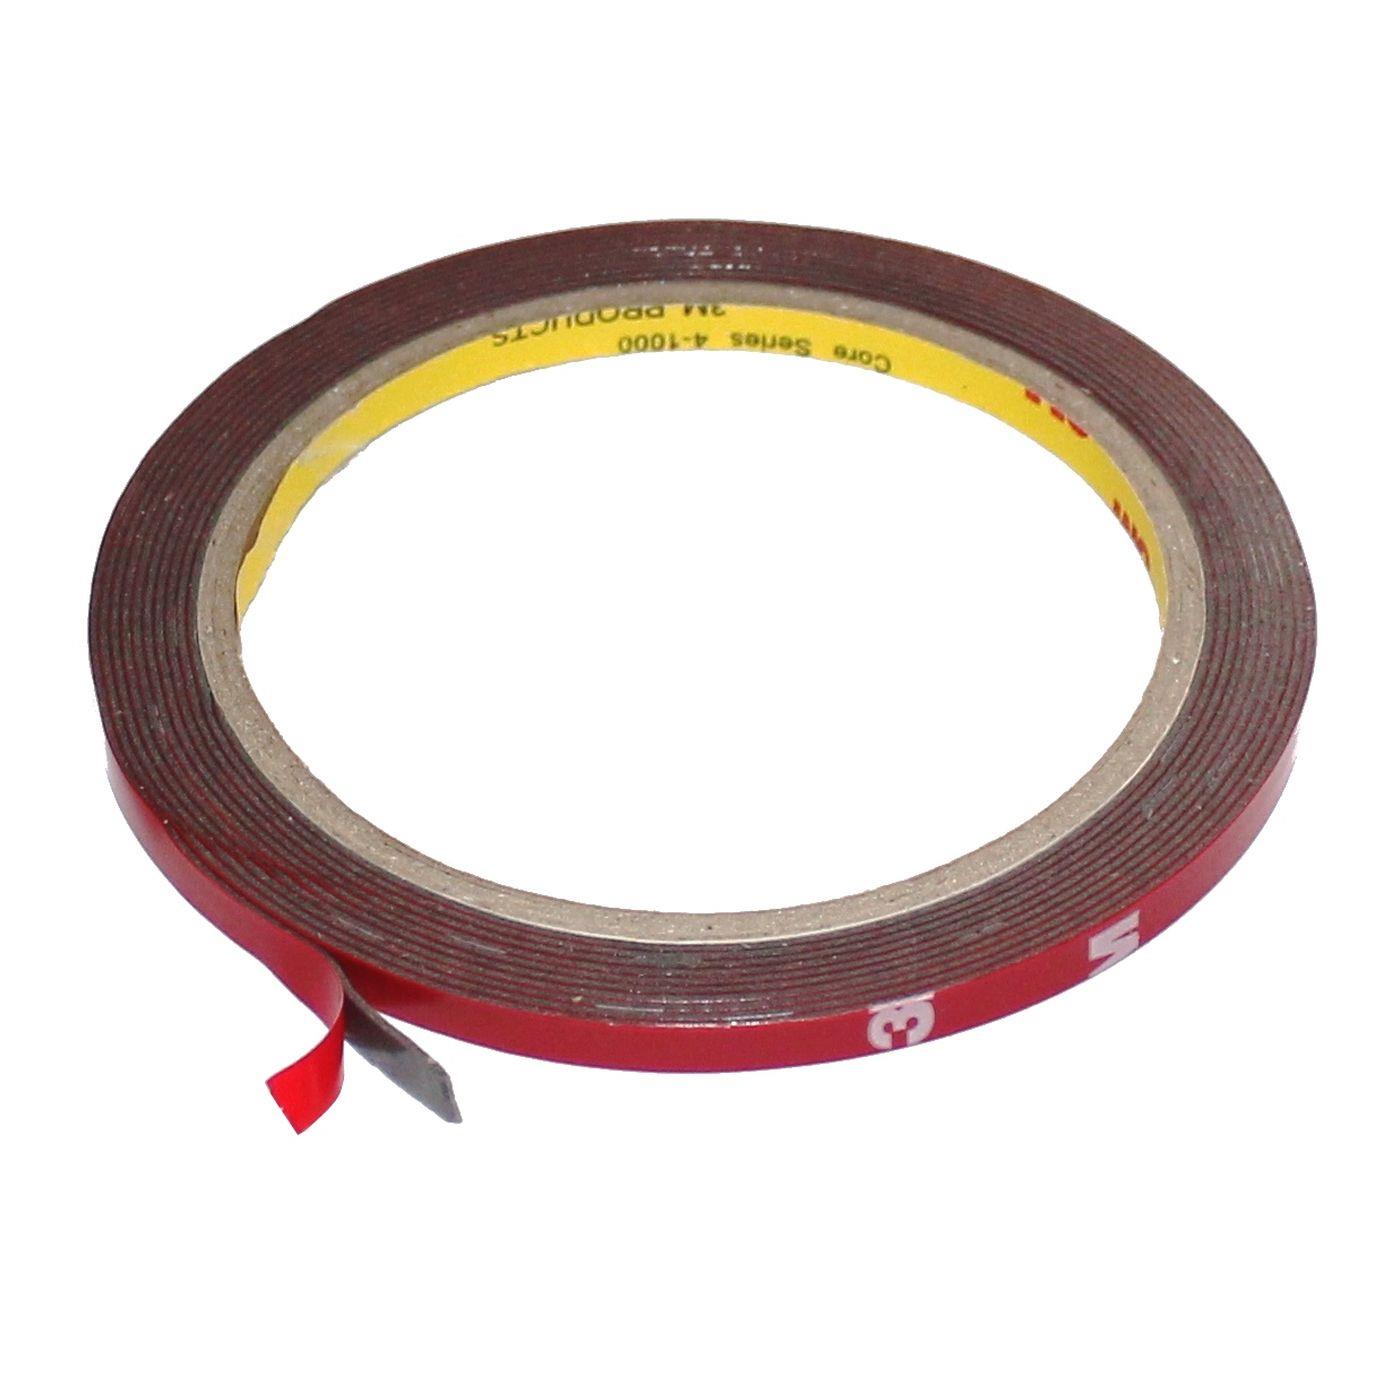 3m Double sided adhesive tape 3M 4229P 5mm Foam Adhesive Tape Car strong